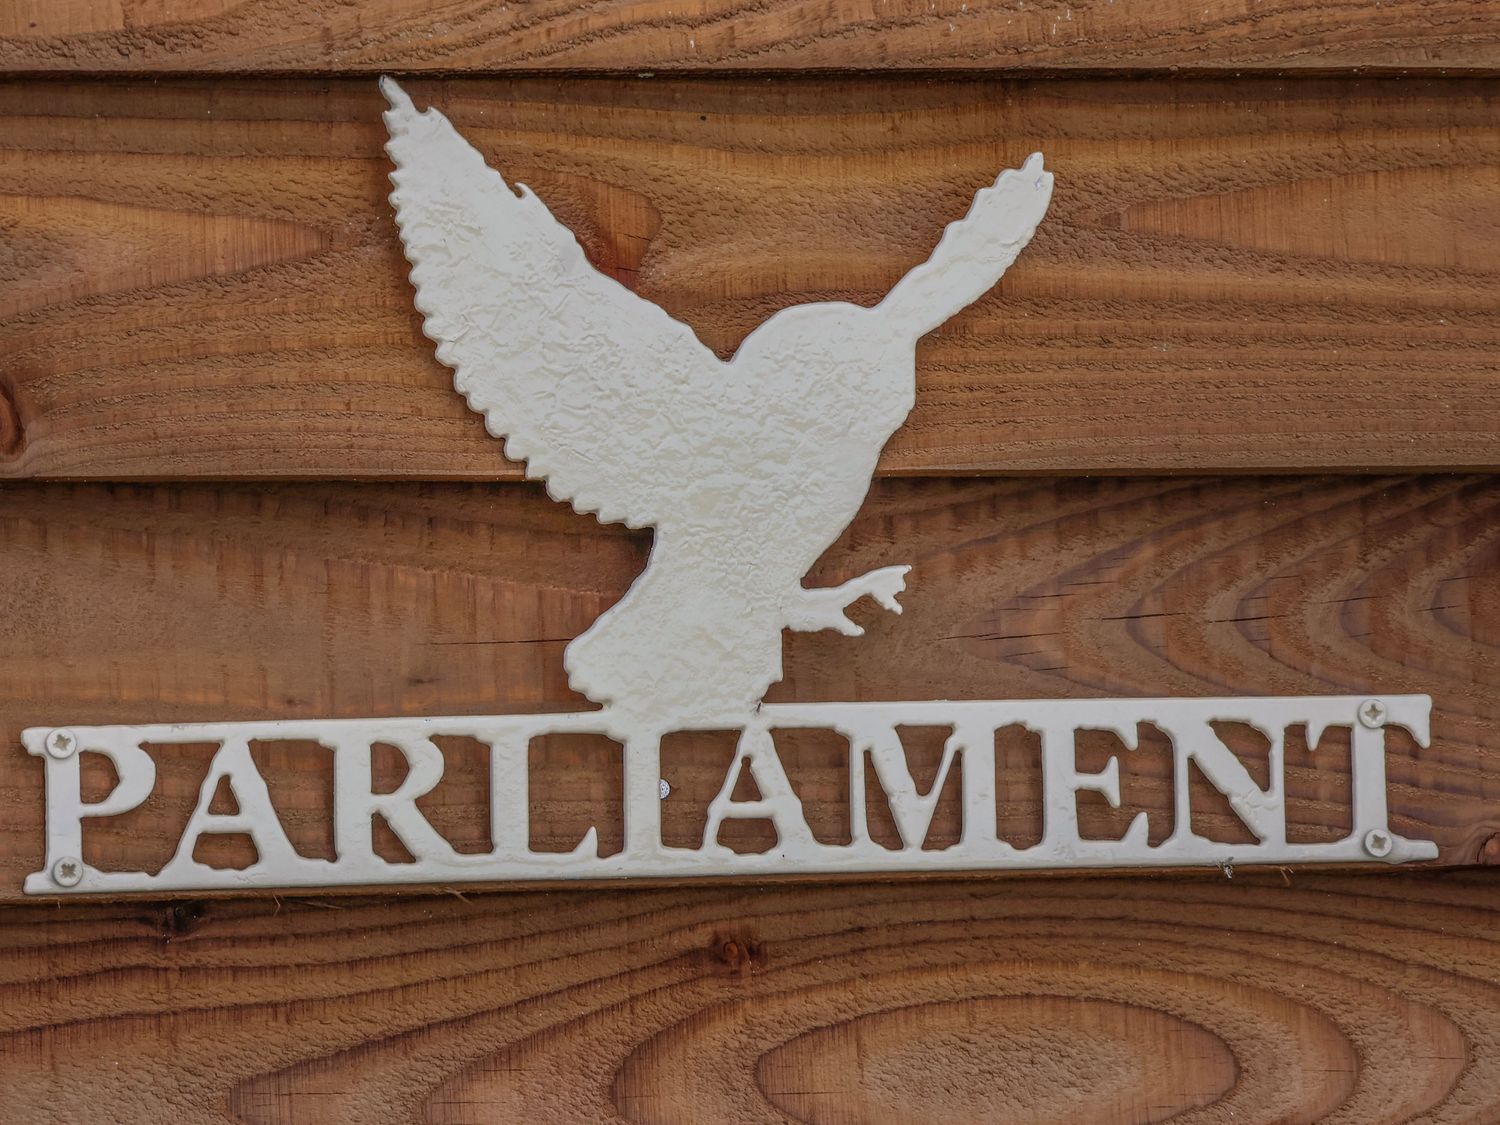 Parliament near Bridlington, Yorkshire, studio-style layout, romantic barbecue and countryside views